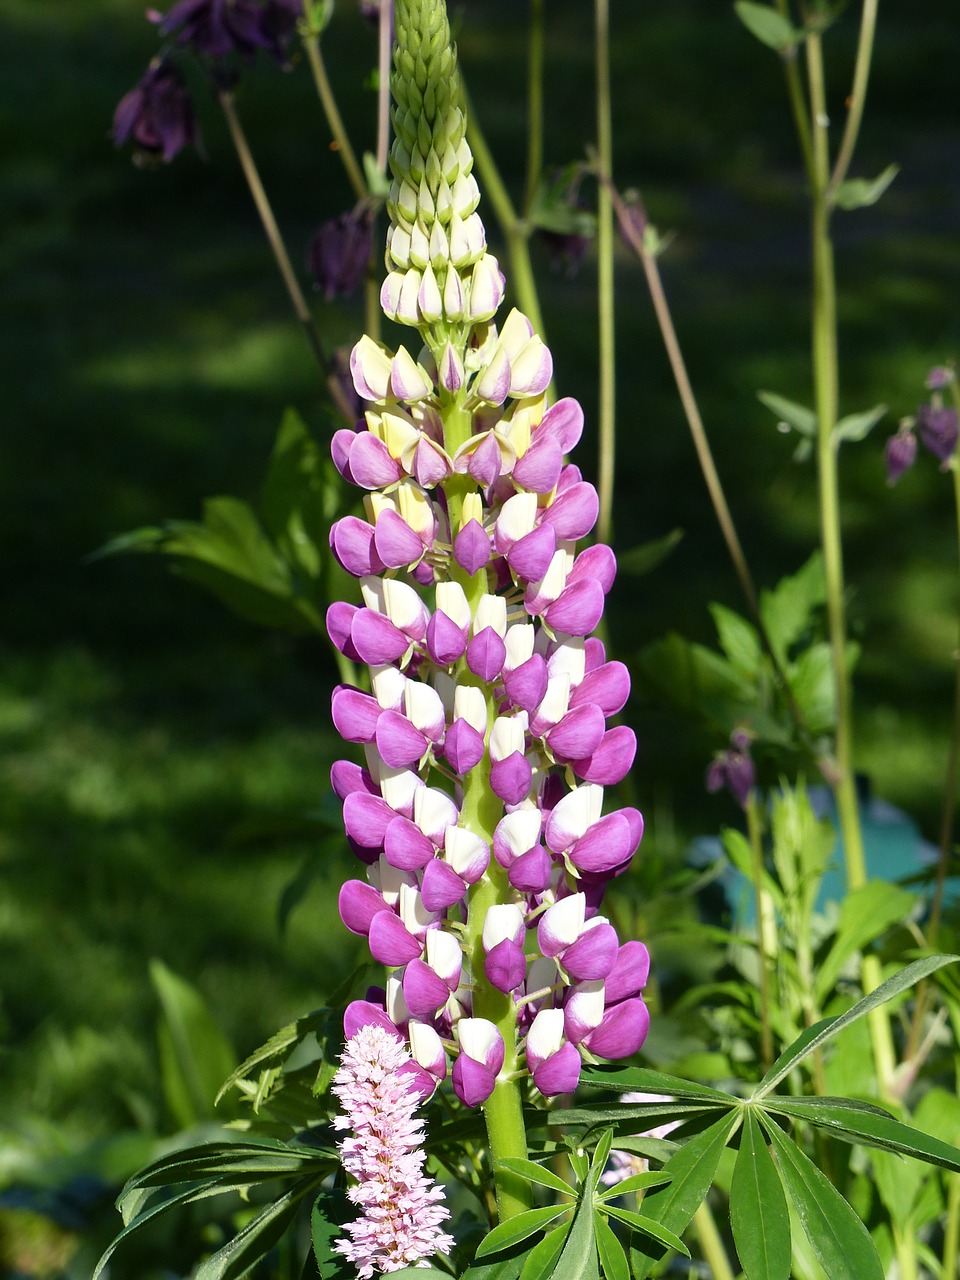 Lupin Flower Colors Summer Garden Free Image From Needpix Com